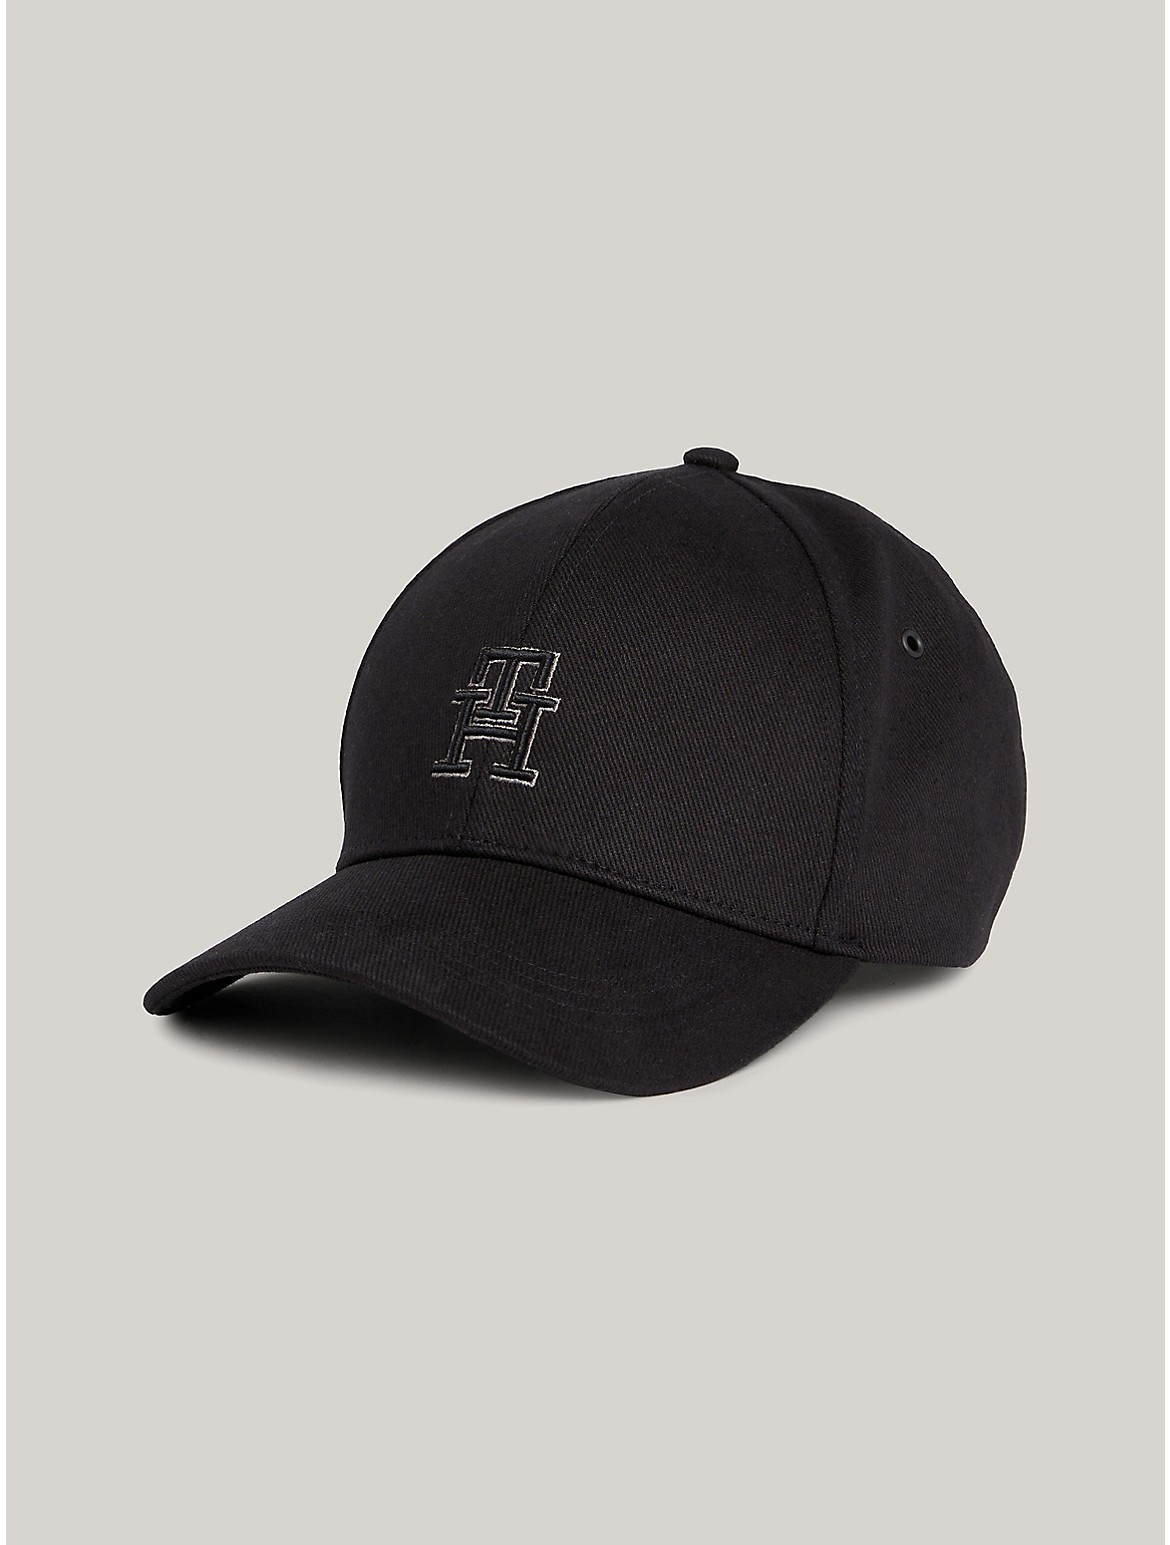 Tommy Hilfiger Men's Embroidered TH Logo Twill Cap